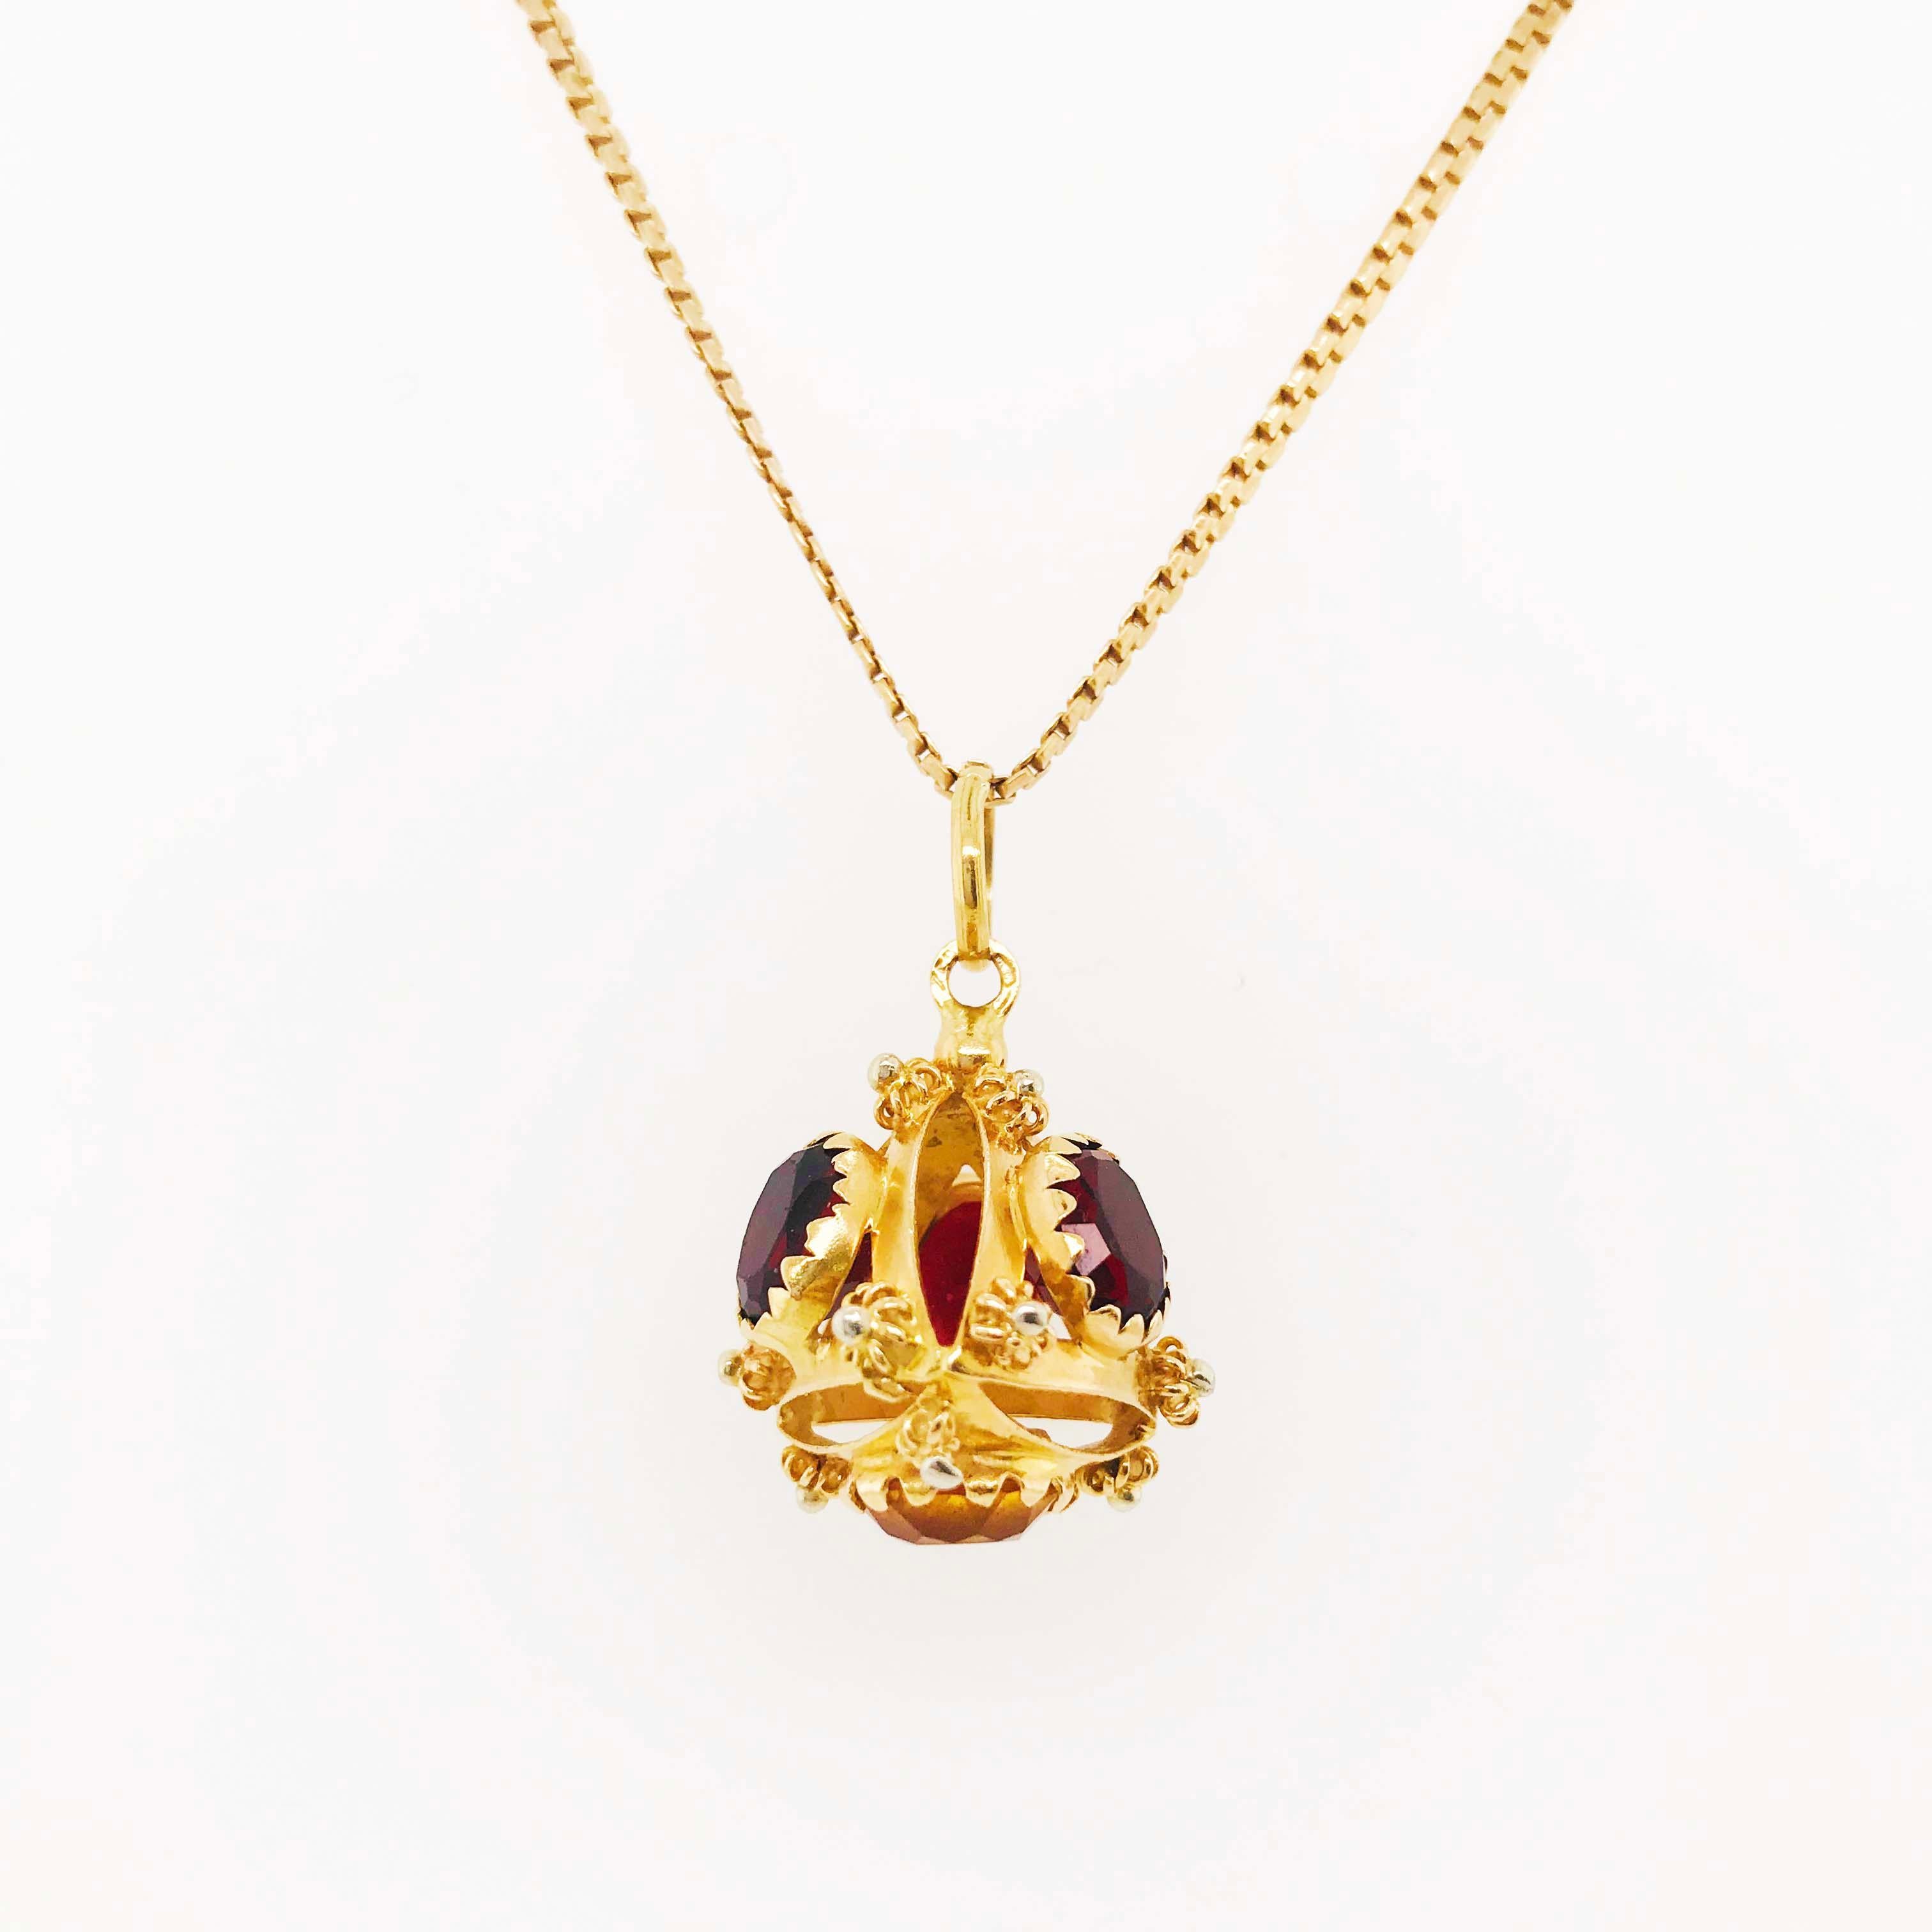 The gemstone pyramid charm or pendant has been handmade and hand fabricated with the precious metal, 18 karat yellow gold and natural, genuine gemstones. This custom pendant is a unique, renaissance style design with incredible detail and